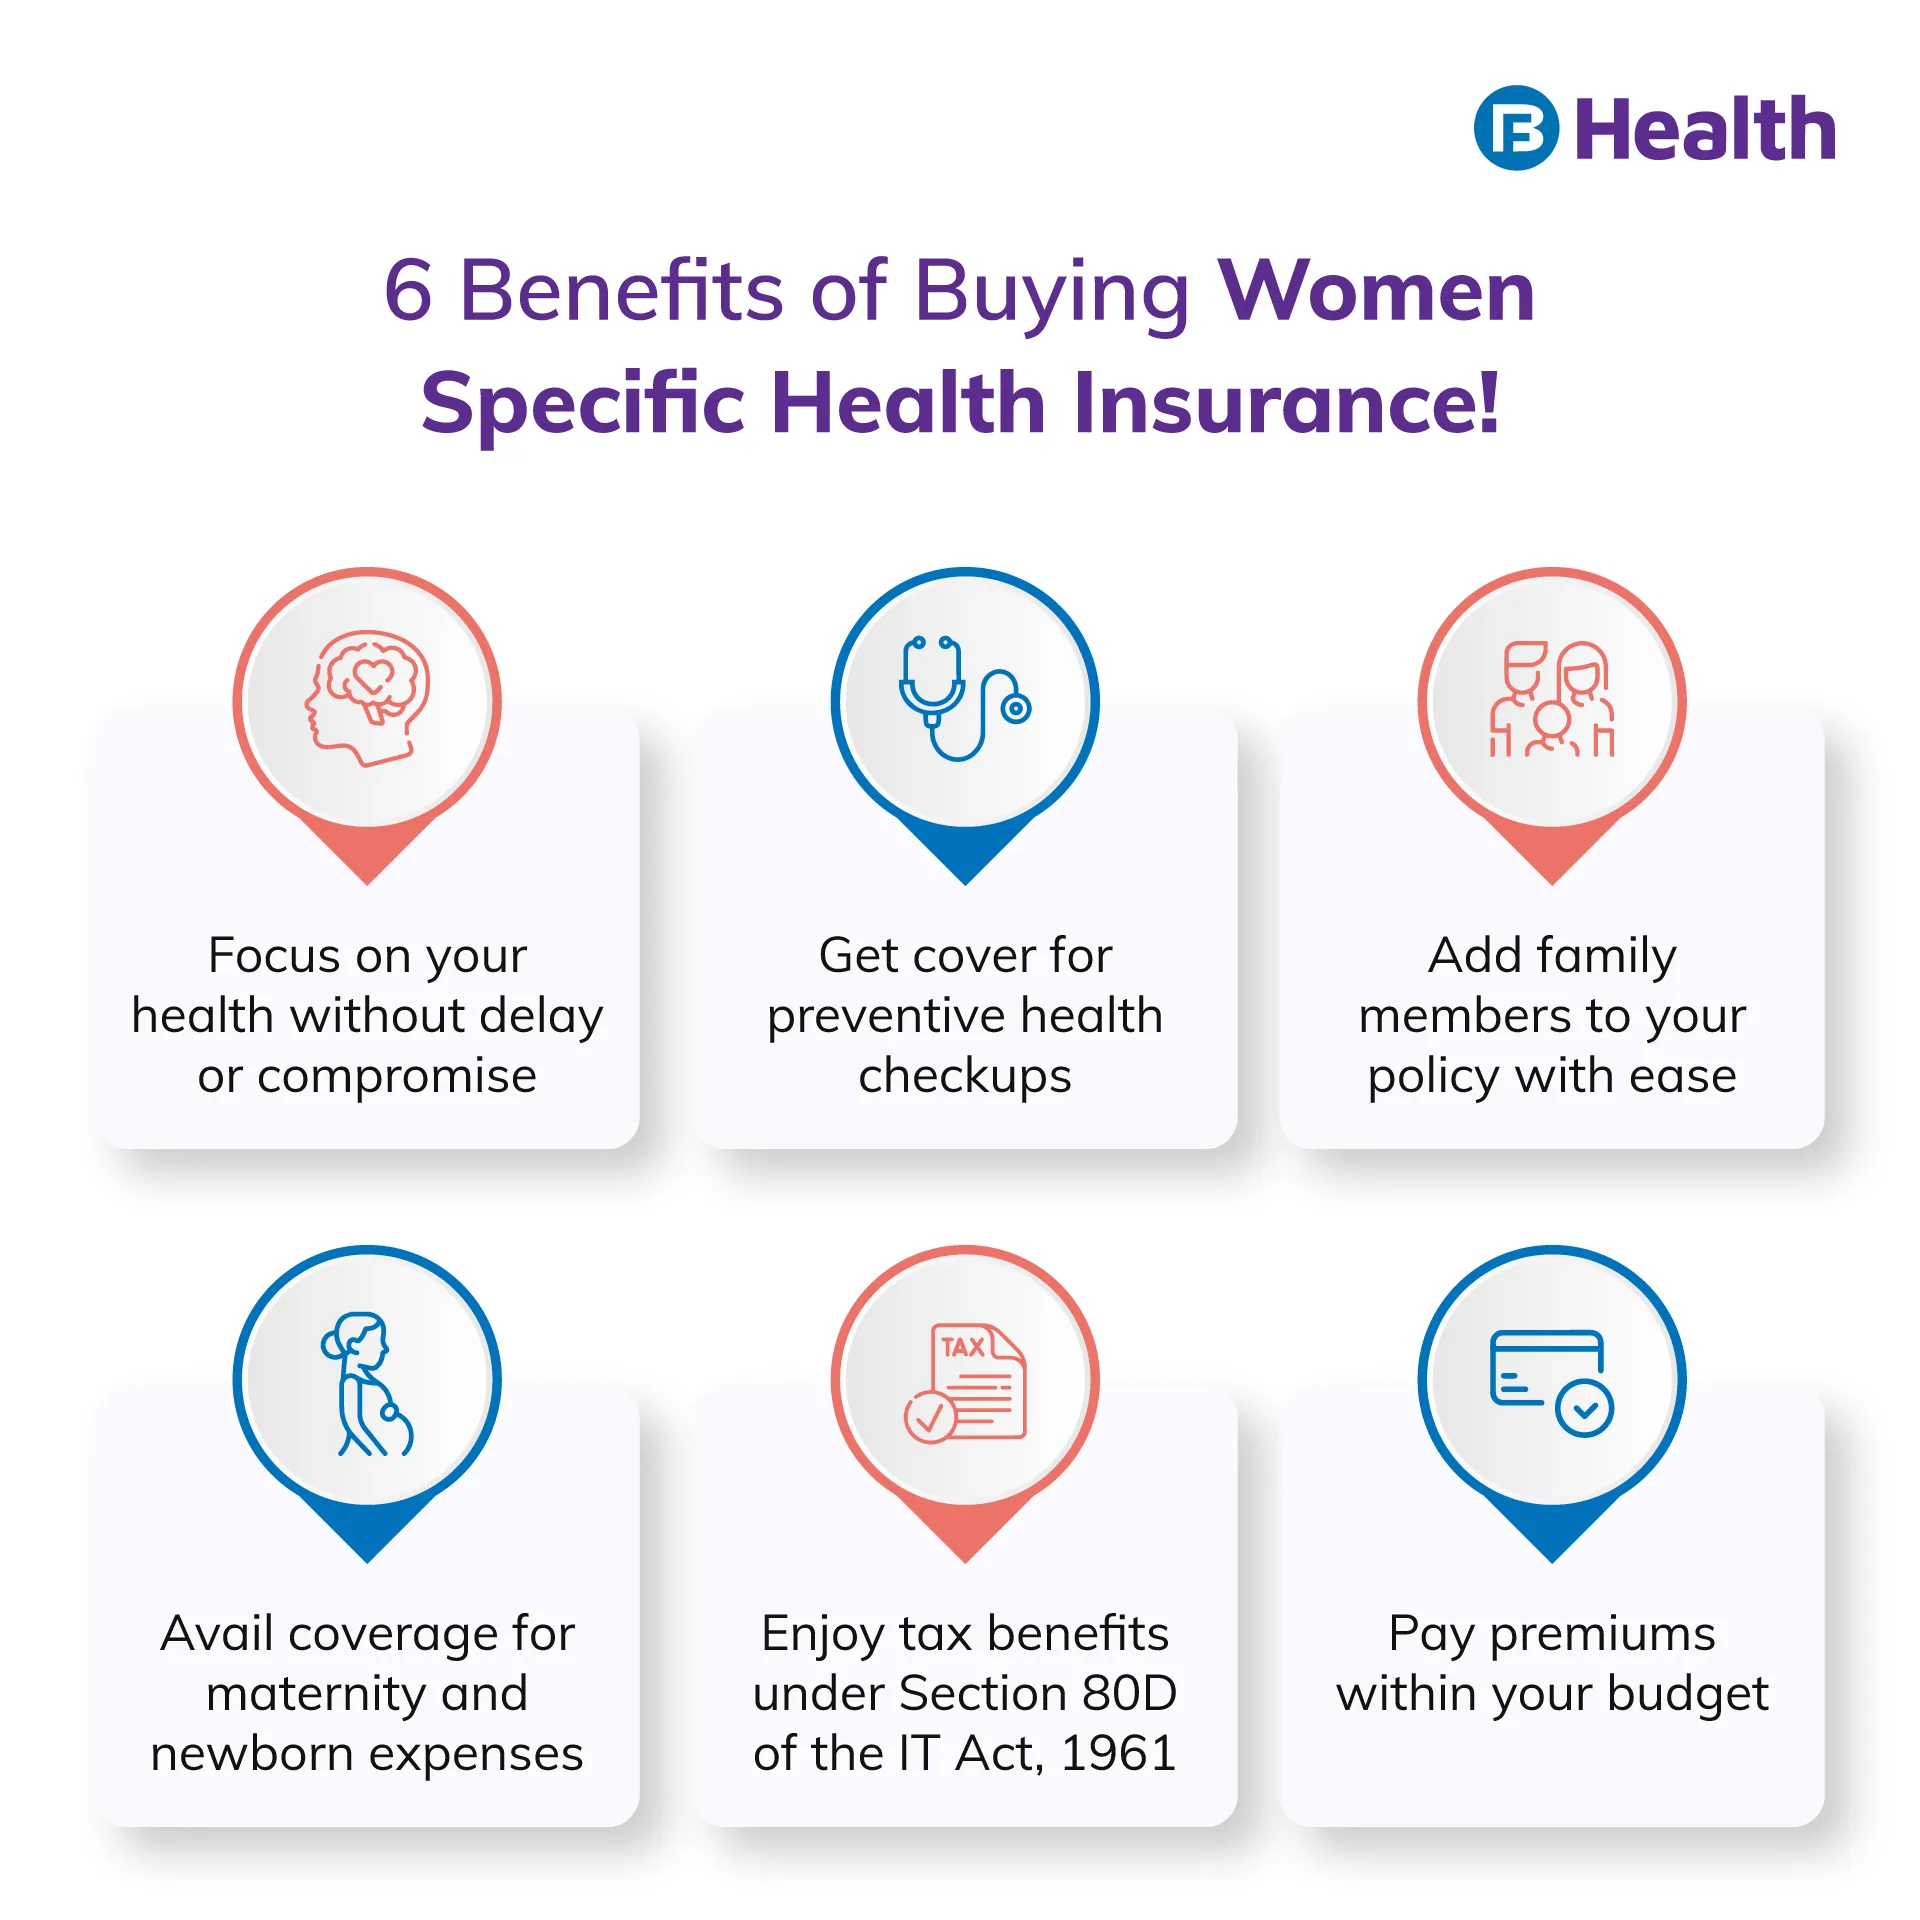 Benefits of health insurance for women